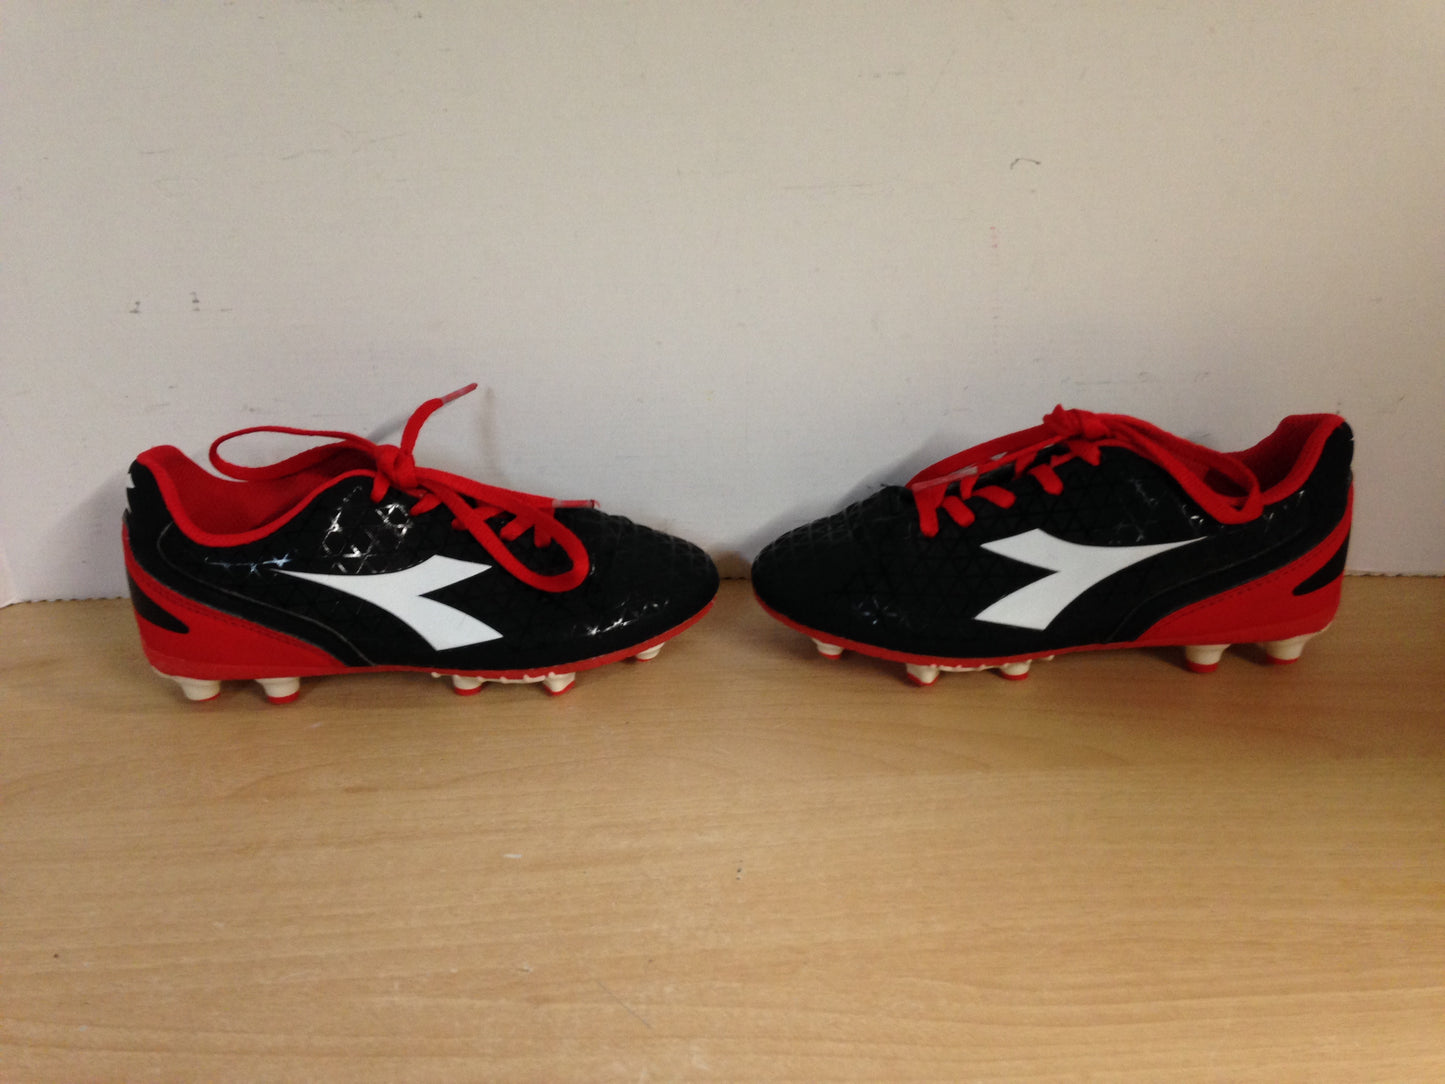 Soccer Shoes Cleats Child Size 1 Didadora Black White Red Excellent